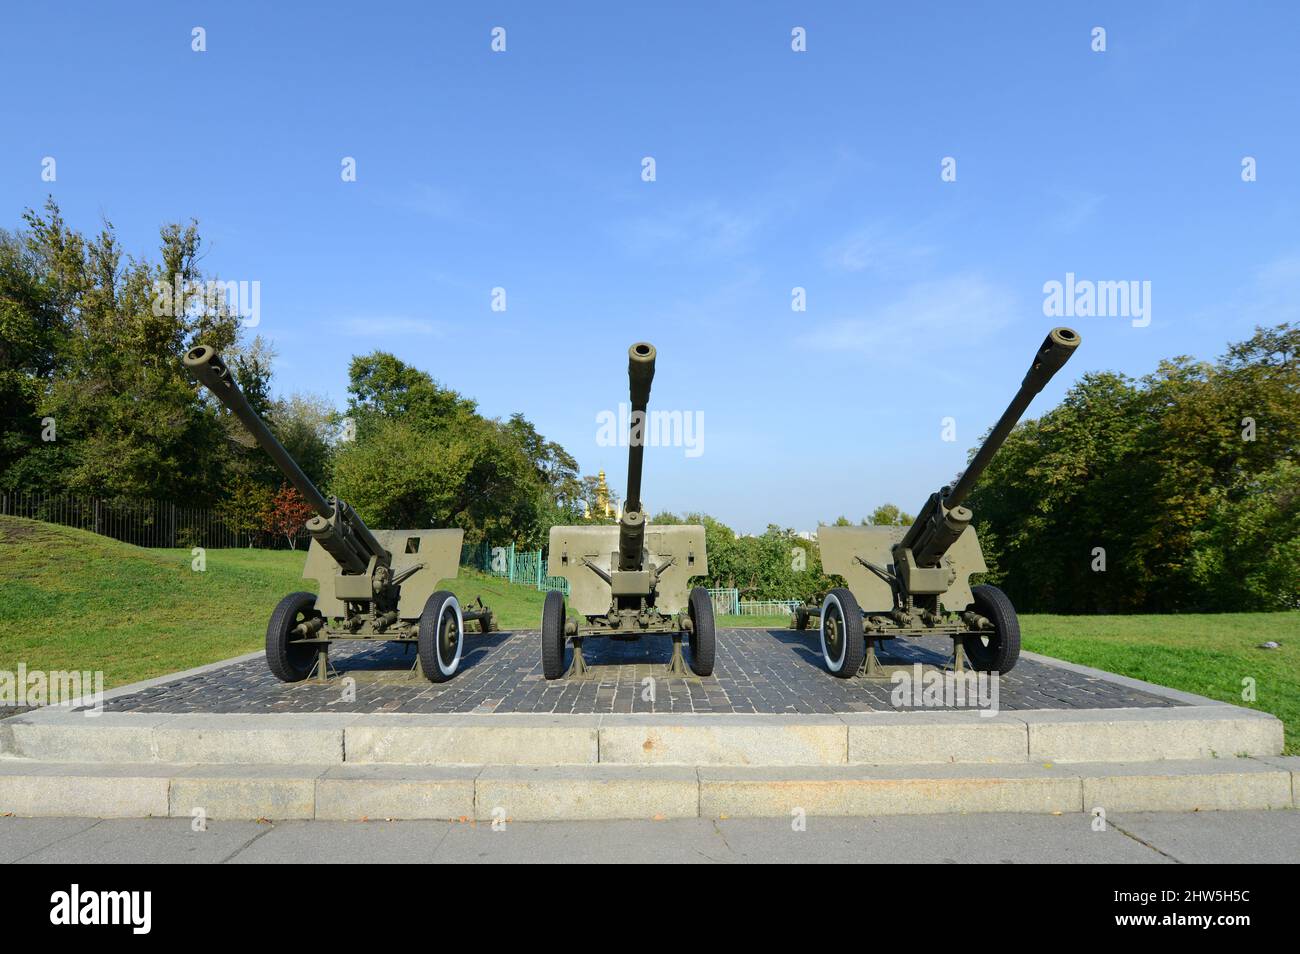 Memorial Complex of Museum of the Great Patriotic War. Military equipment displayed, both old or captured during the 2014 conflict in Eastern Ukraine. Stock Photo